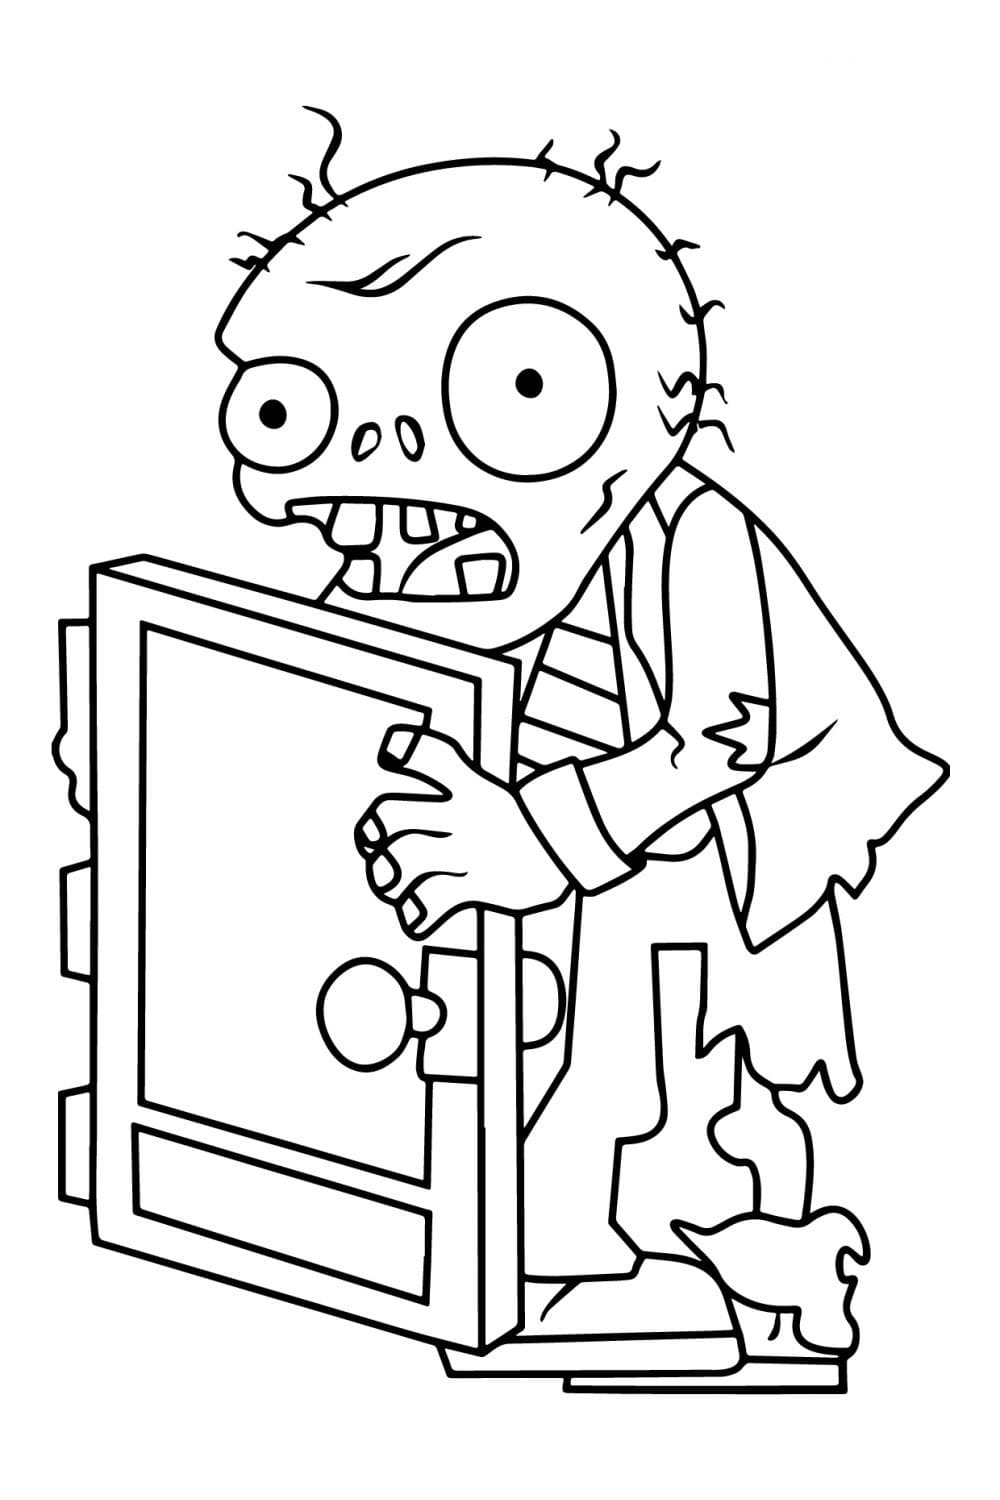 Zombie Coloring Pages